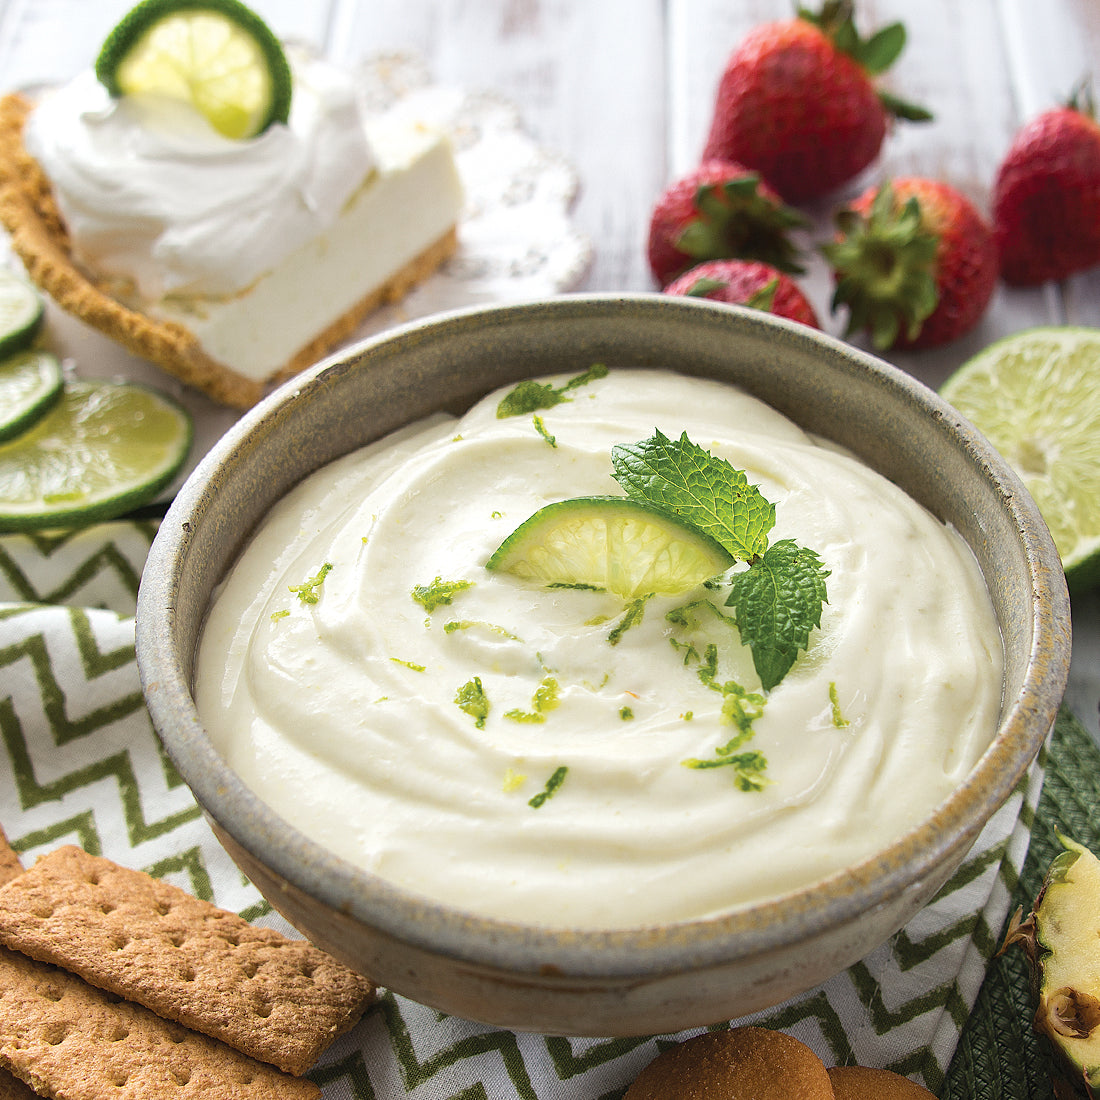 Key Lime Sweet Dip garnished with lime wedges.